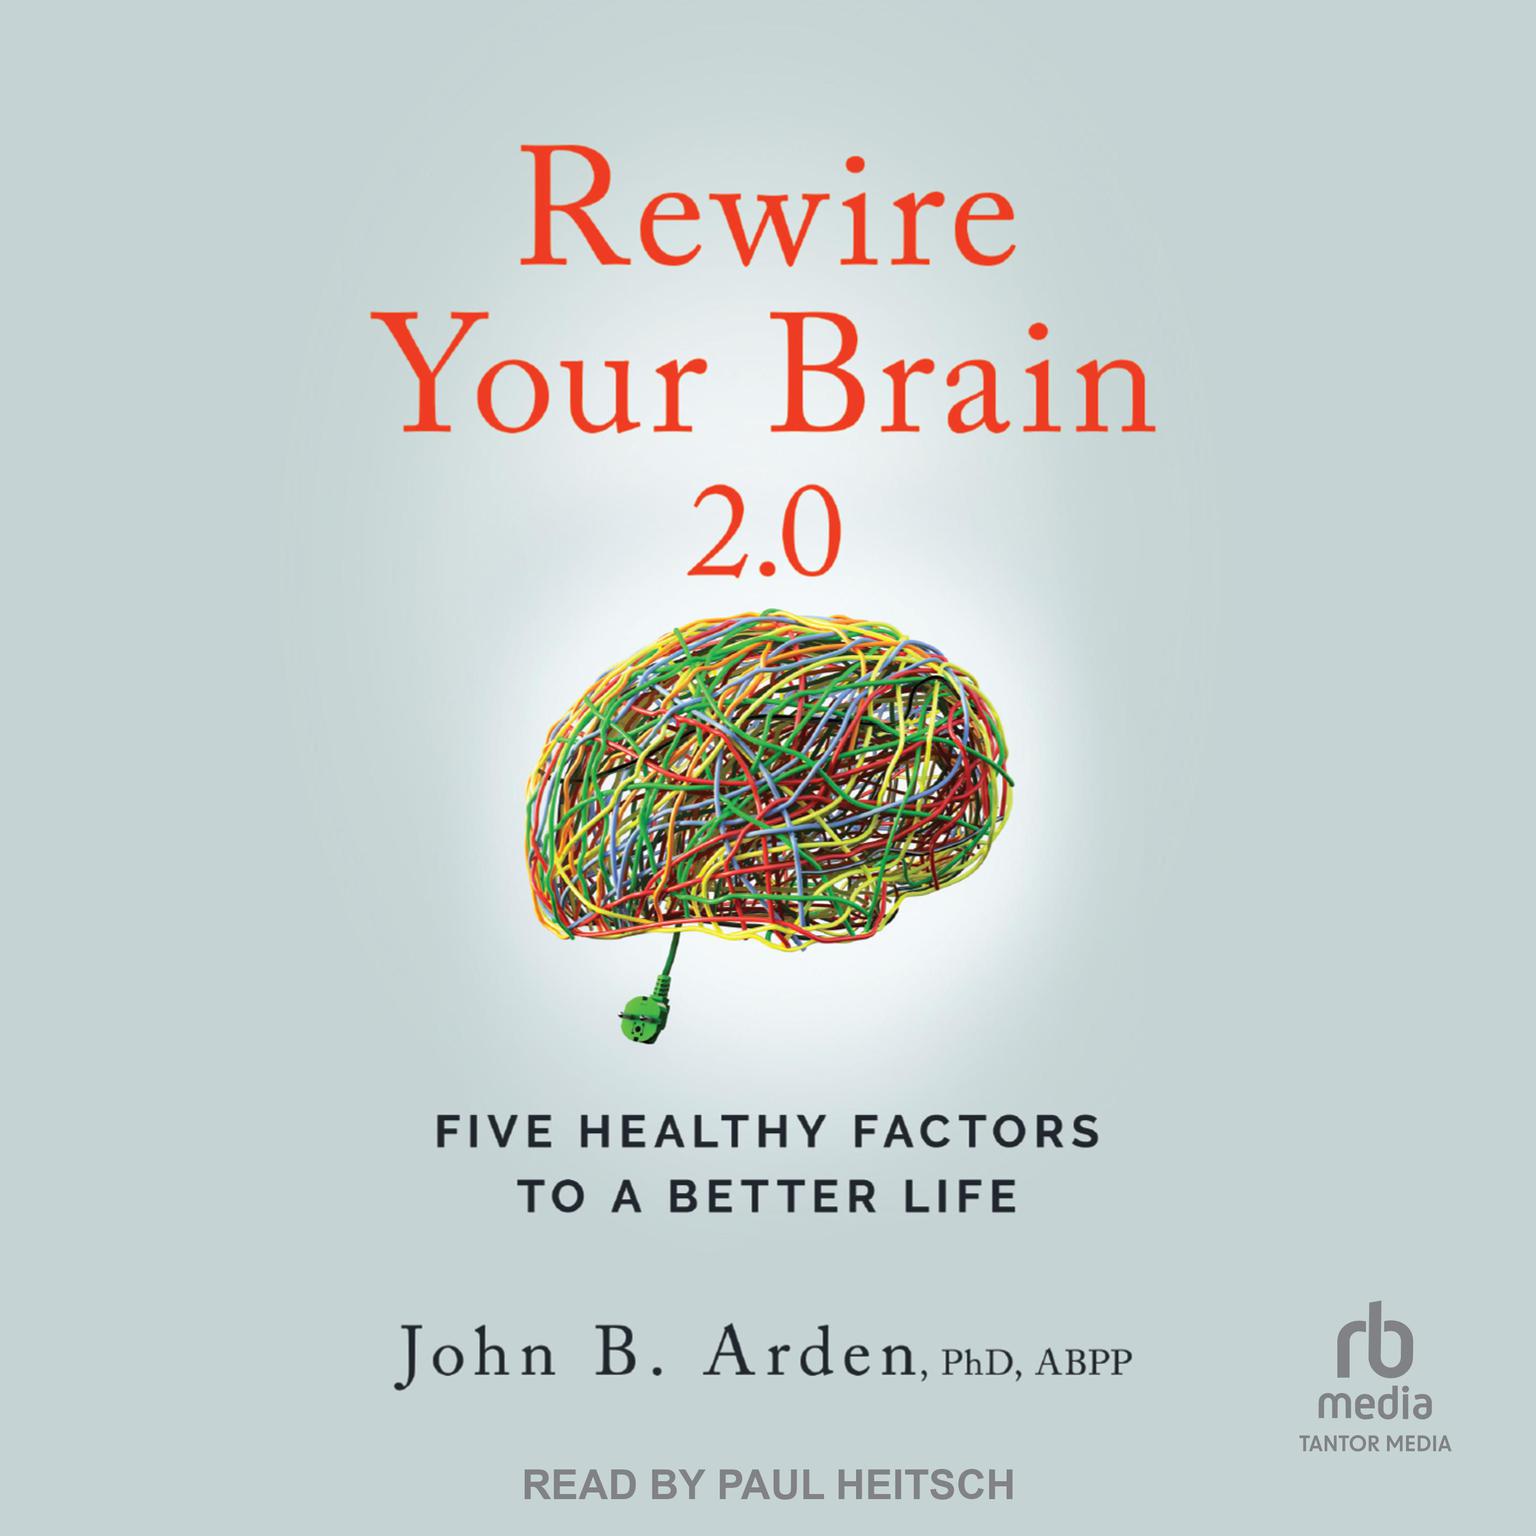 Rewire Your Brain 2.0: Five Healthy Factors to a Better Life, 2nd Edition Audiobook, by John B. Arden, PhD, ABPP